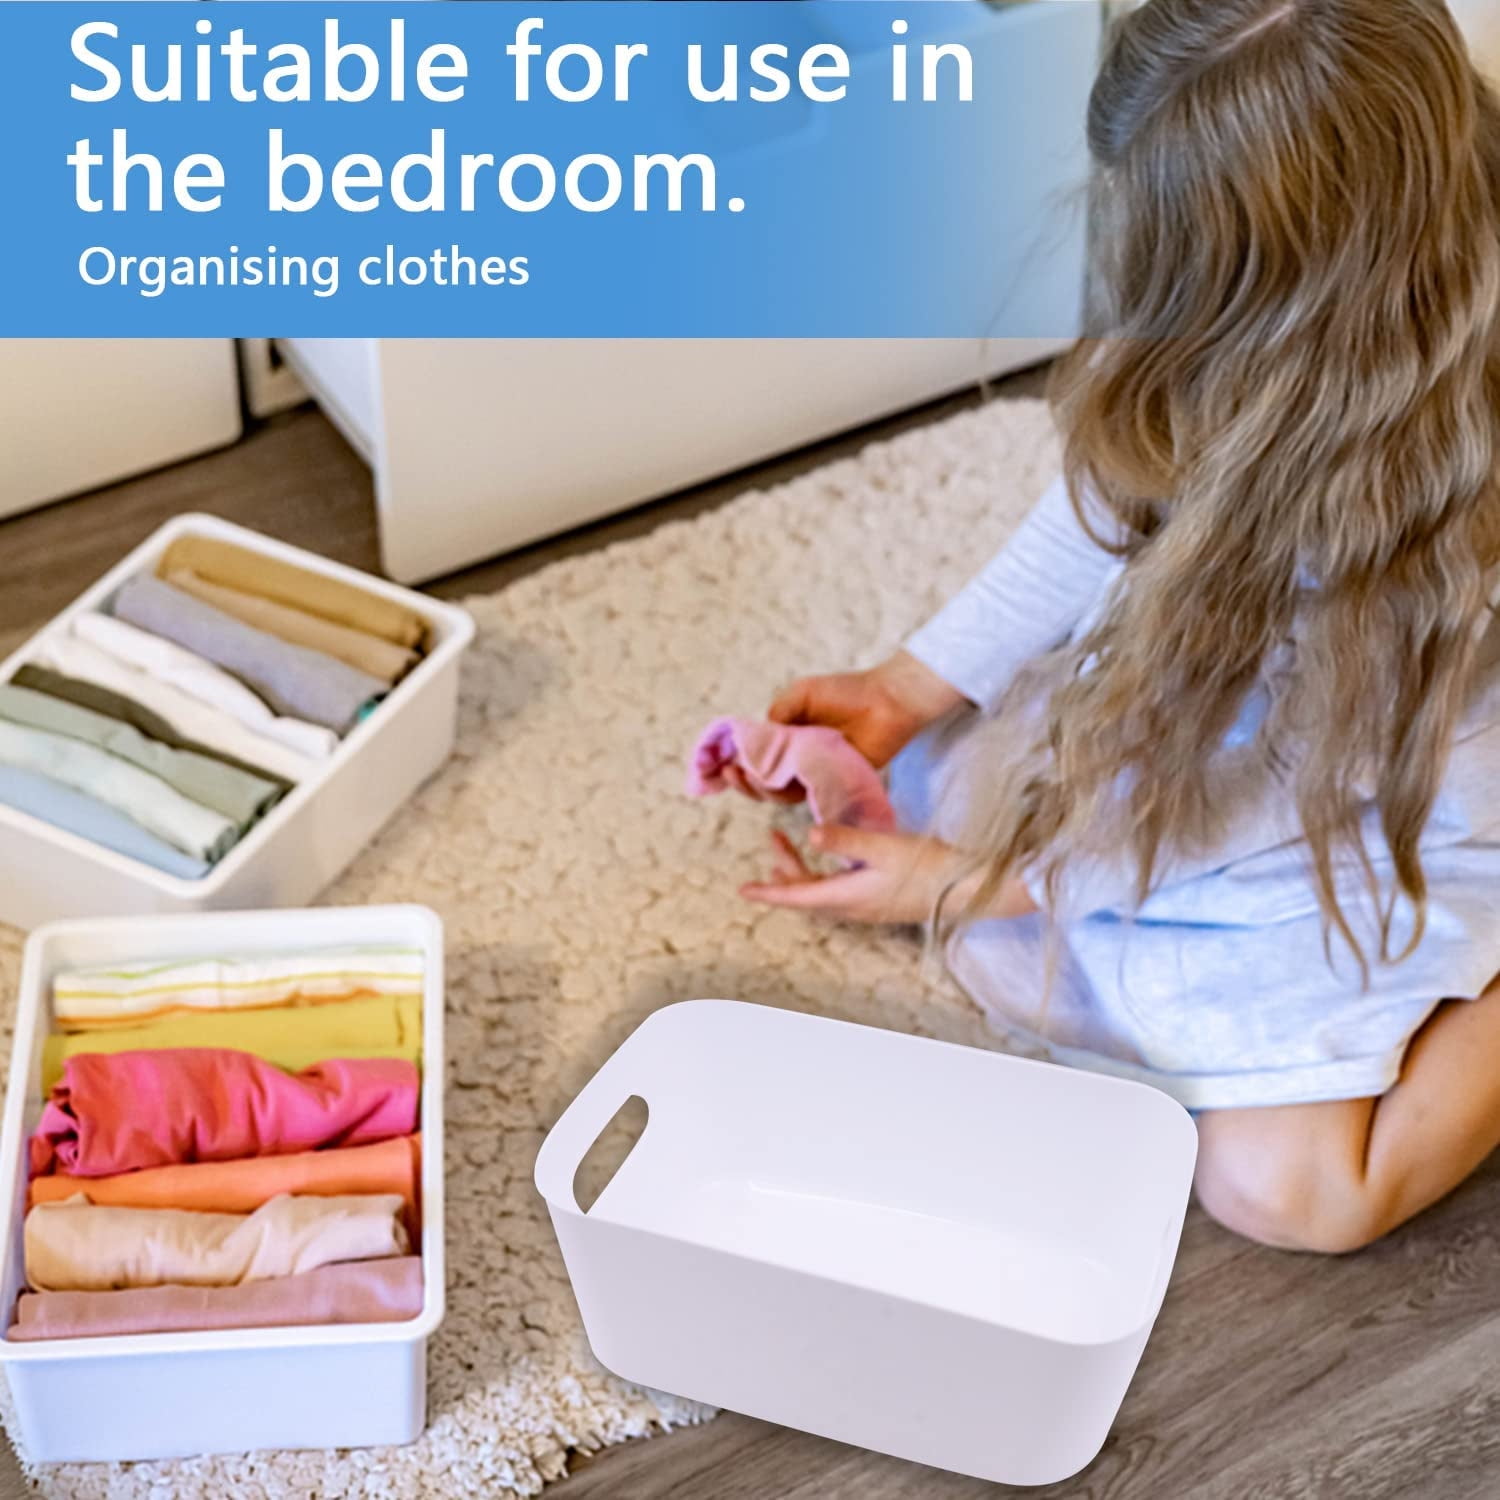 Casewin Plastic Storage Boxes, Multiple Colour Organisation Storage Baskets  for Kitchen, Cupboard, Office, Bathroom, Toy, Home Tidy Open Storage Bins  with Handles (7 Pack) 